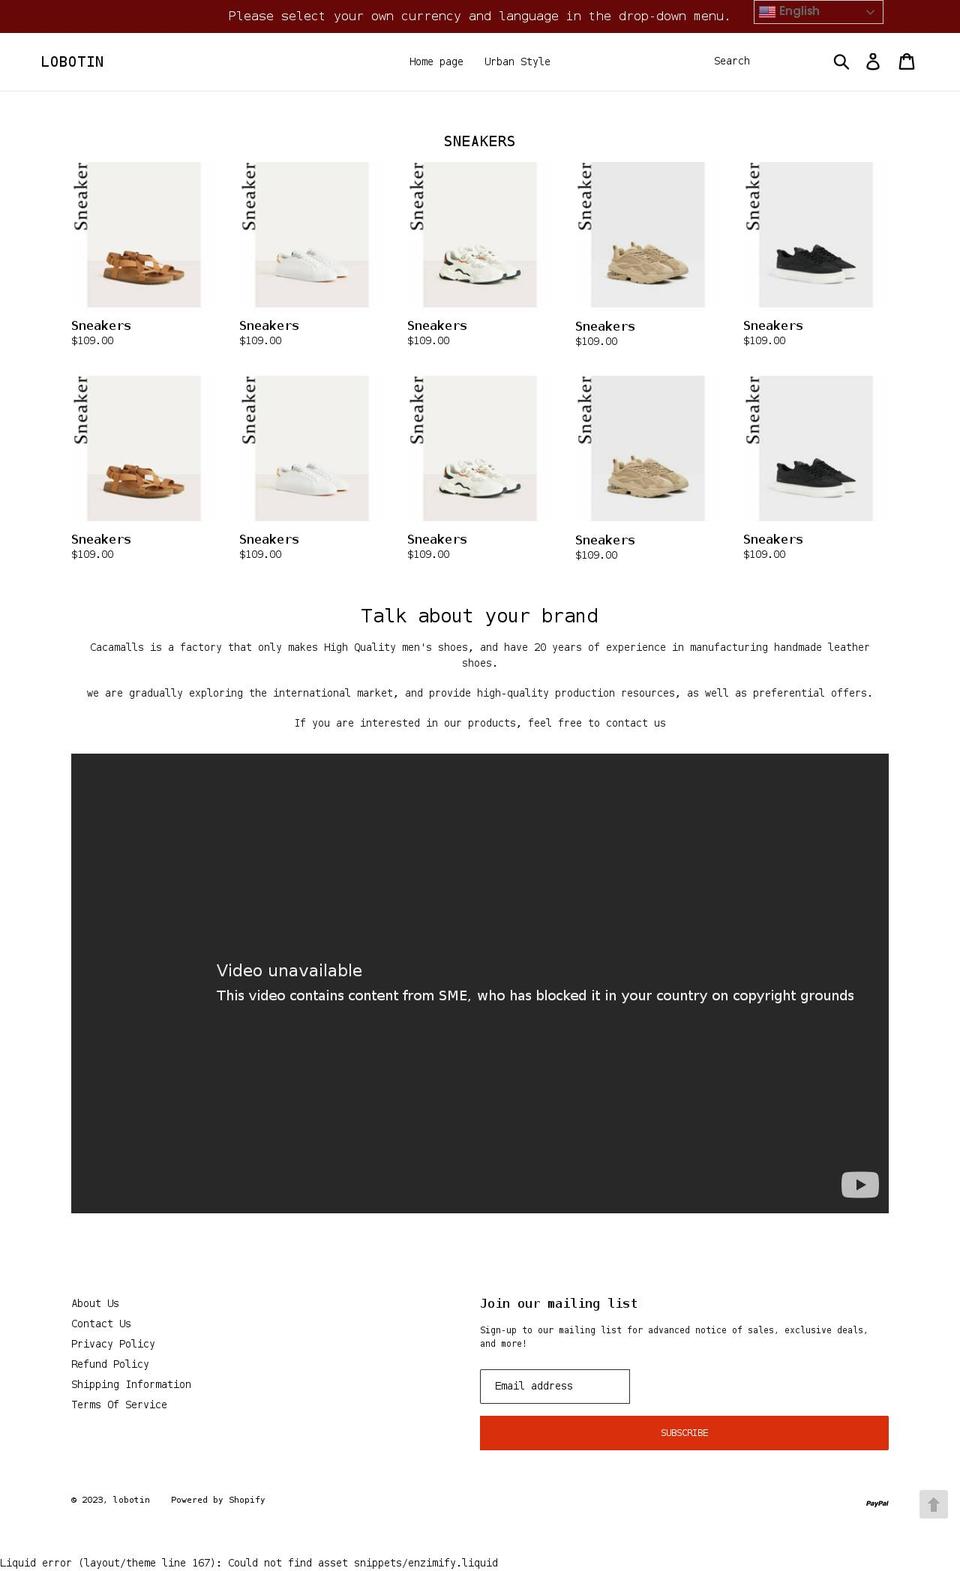 Sneaker Shopify theme site example clsneaker.com